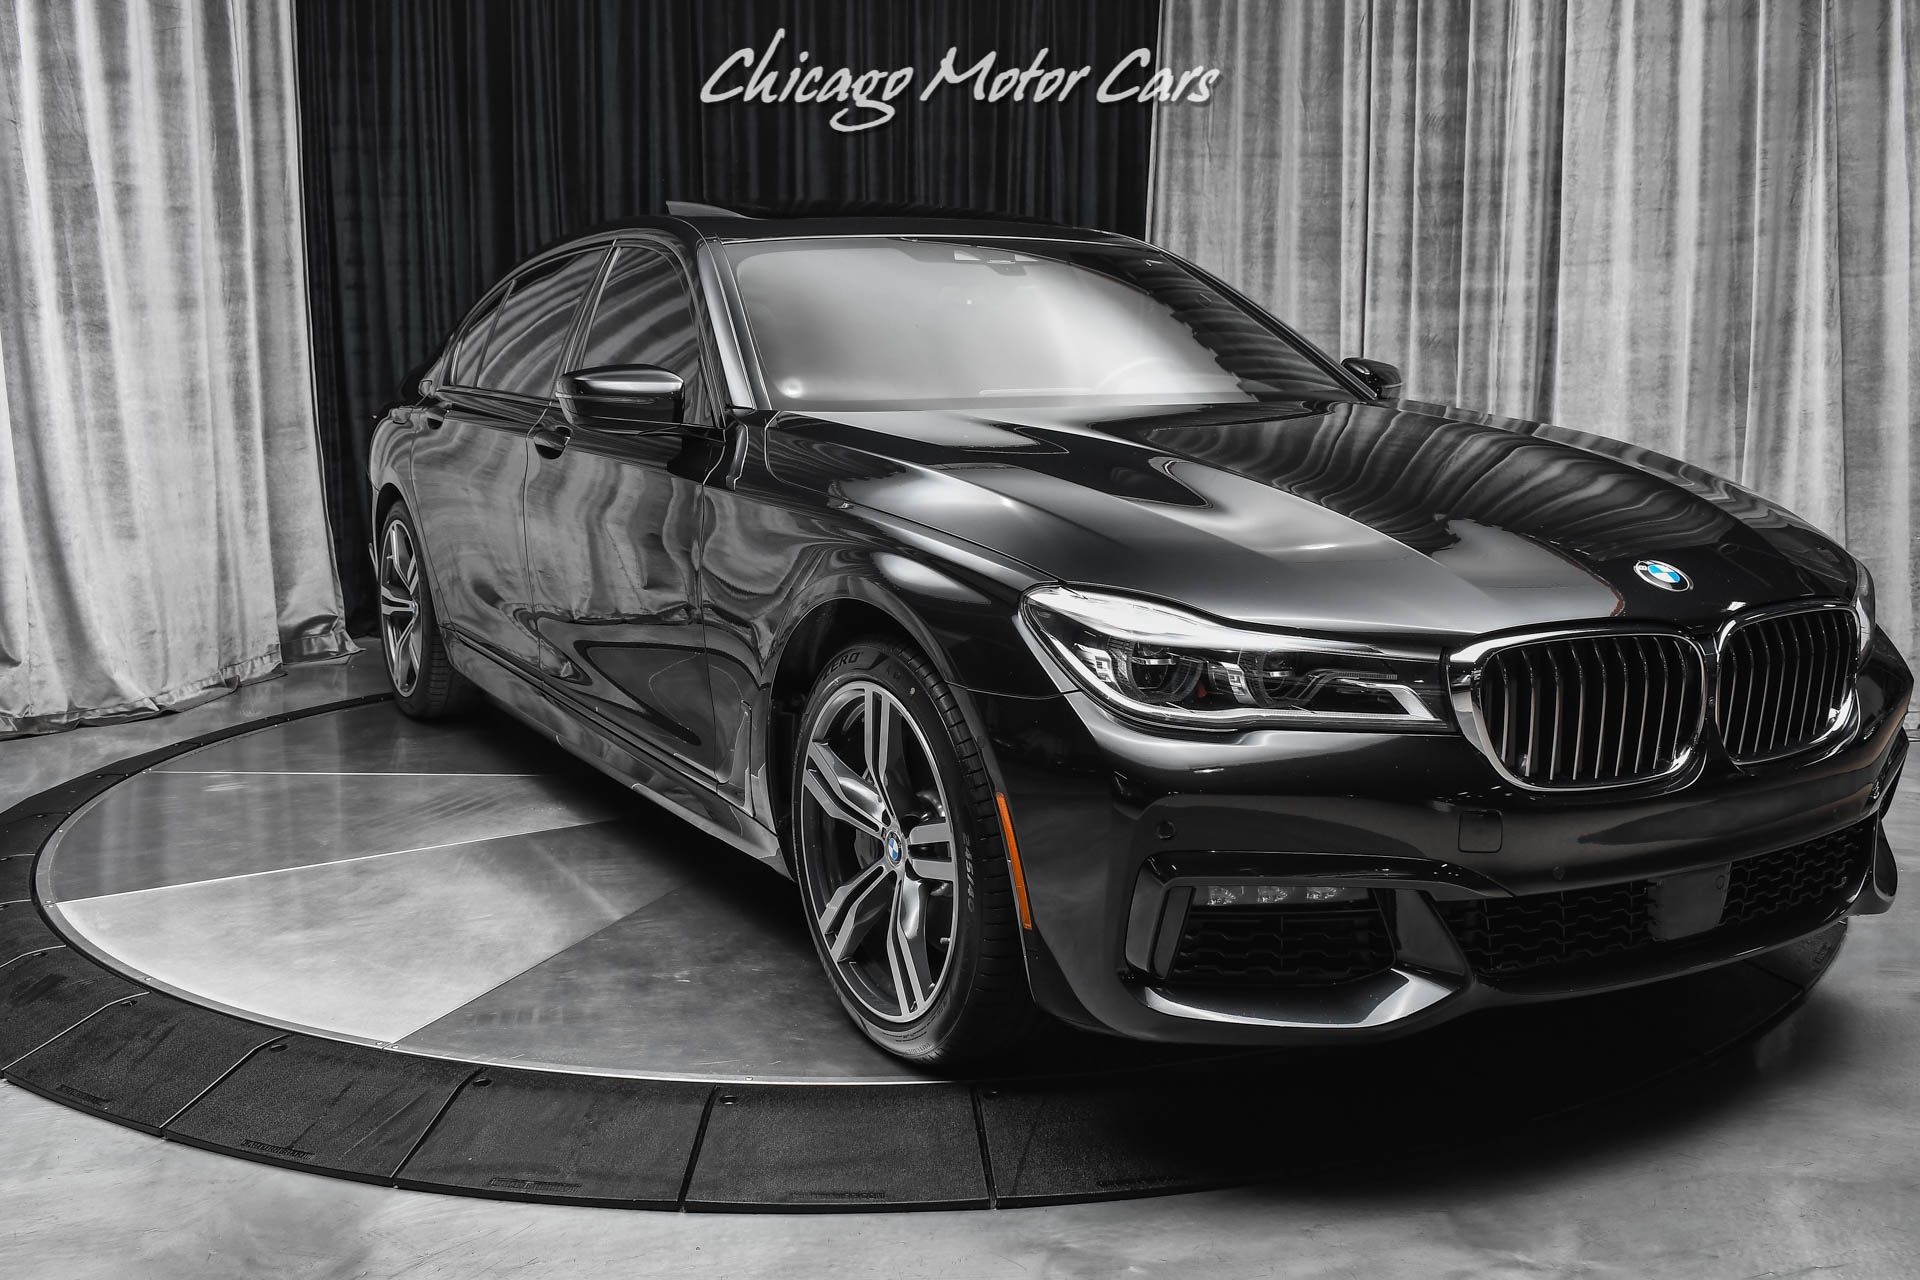 Used-2018-BMW-750i-xDrive-M-Sport-Original-MSRP-125K-FULLY-LOADED-EXCELLENT-CONDITION